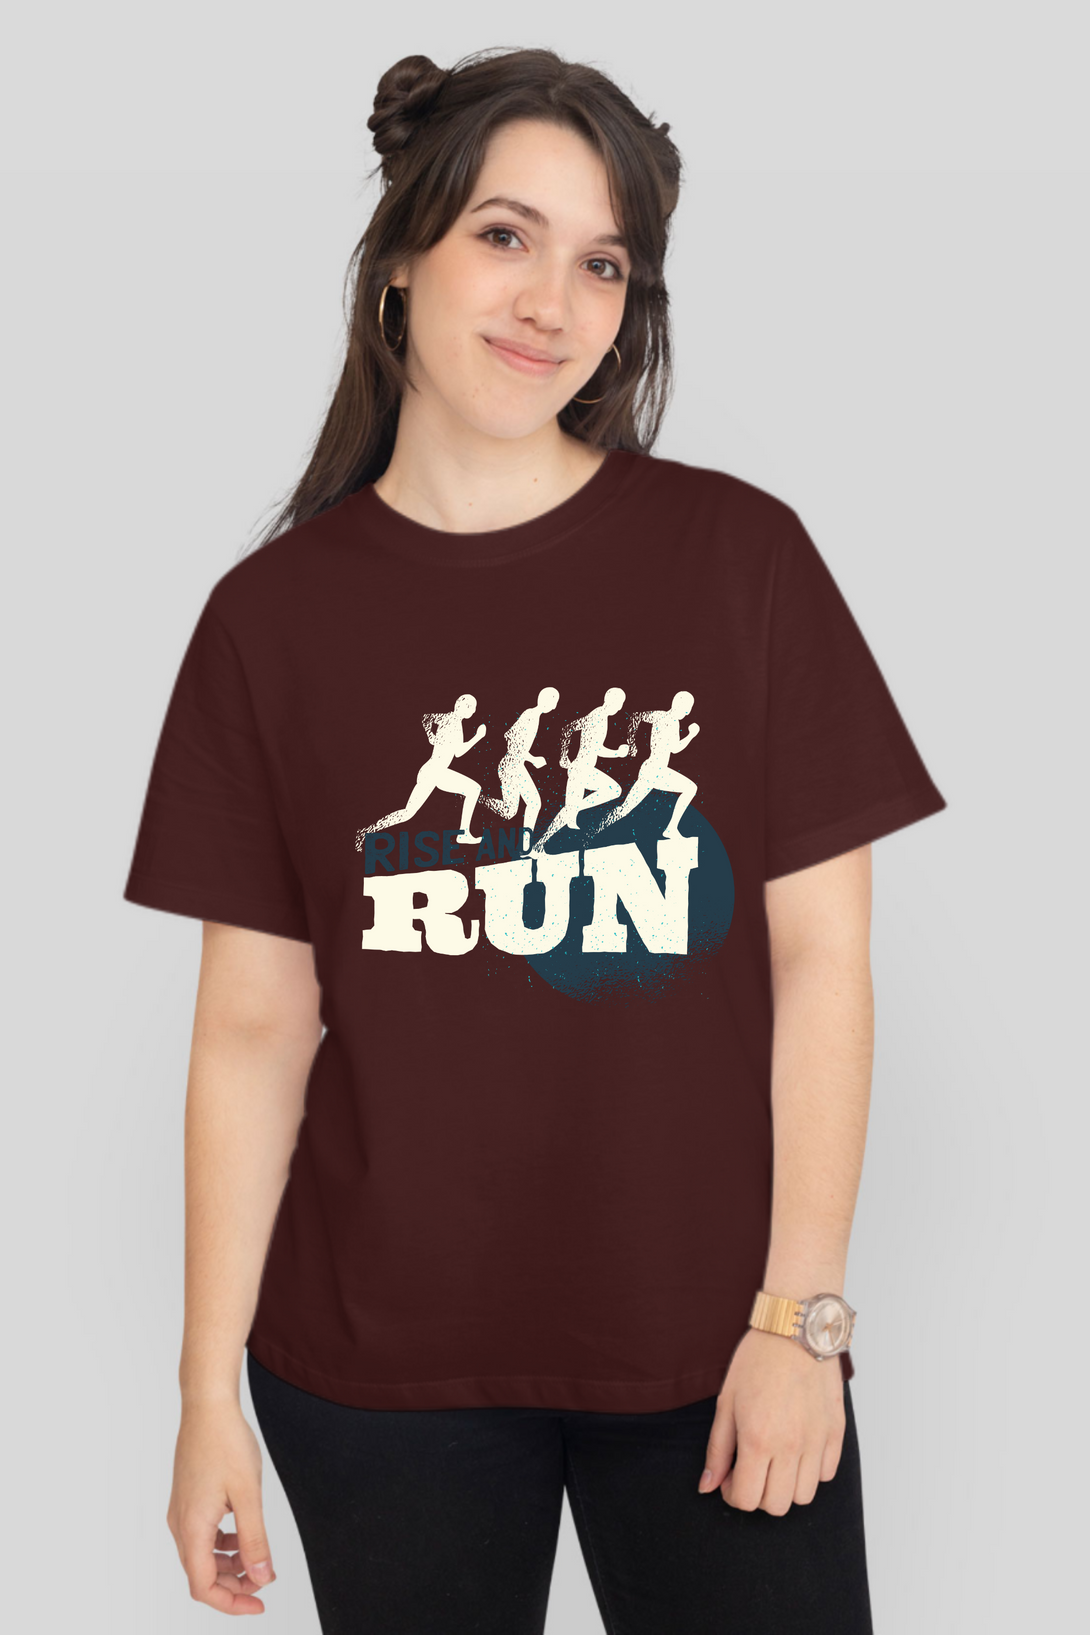 Rise And Run Printed T-Shirt For Women - WowWaves - 9